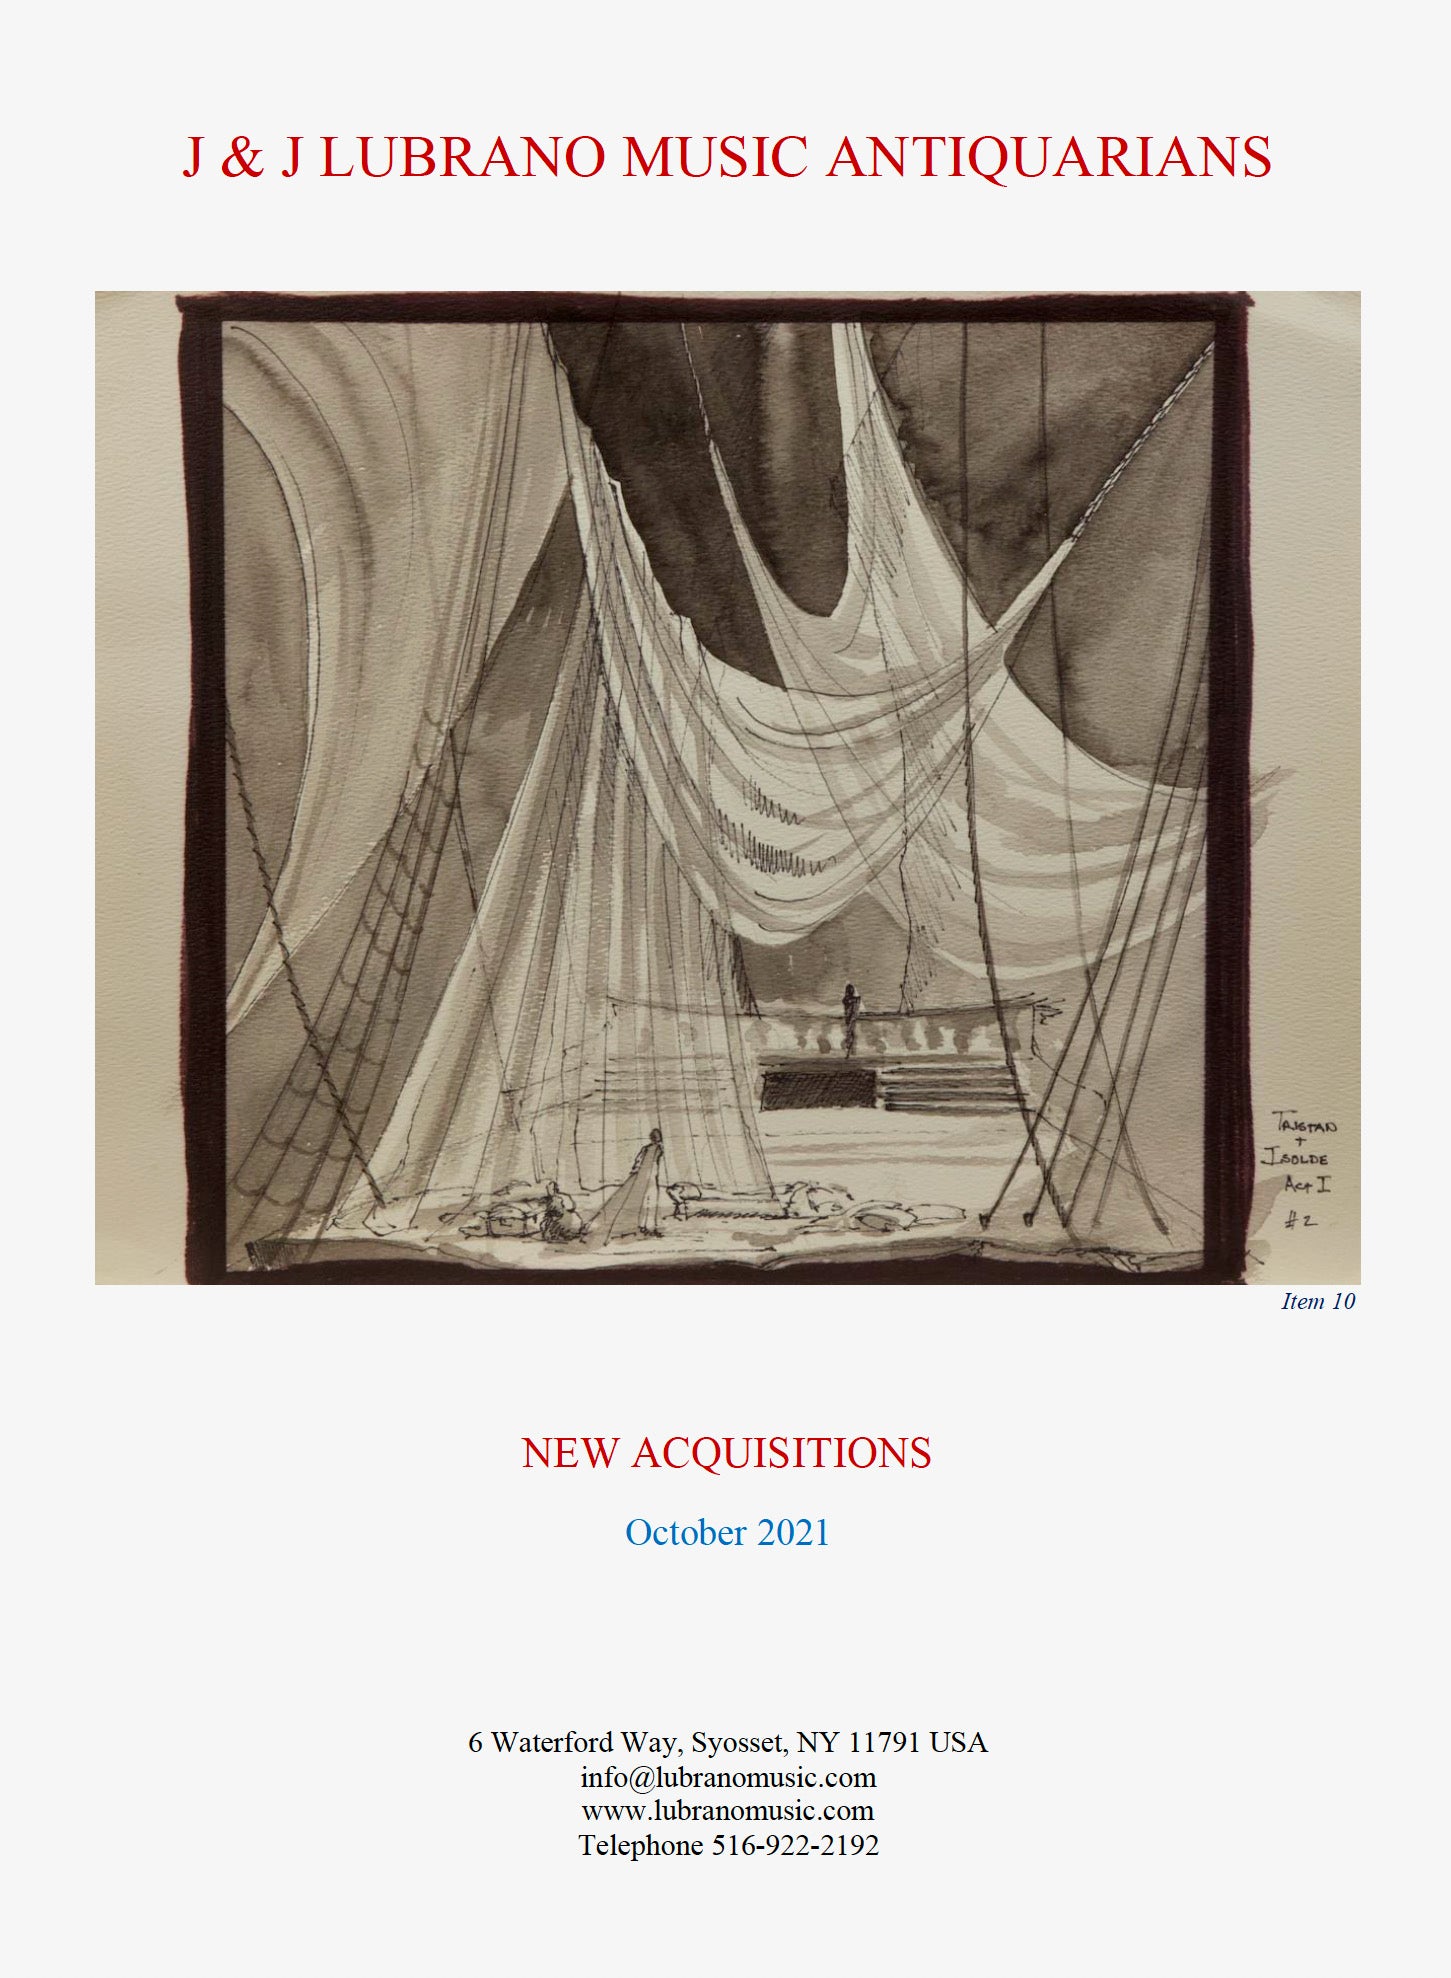 NEW ACQUISITIONS OCTOBER 2021